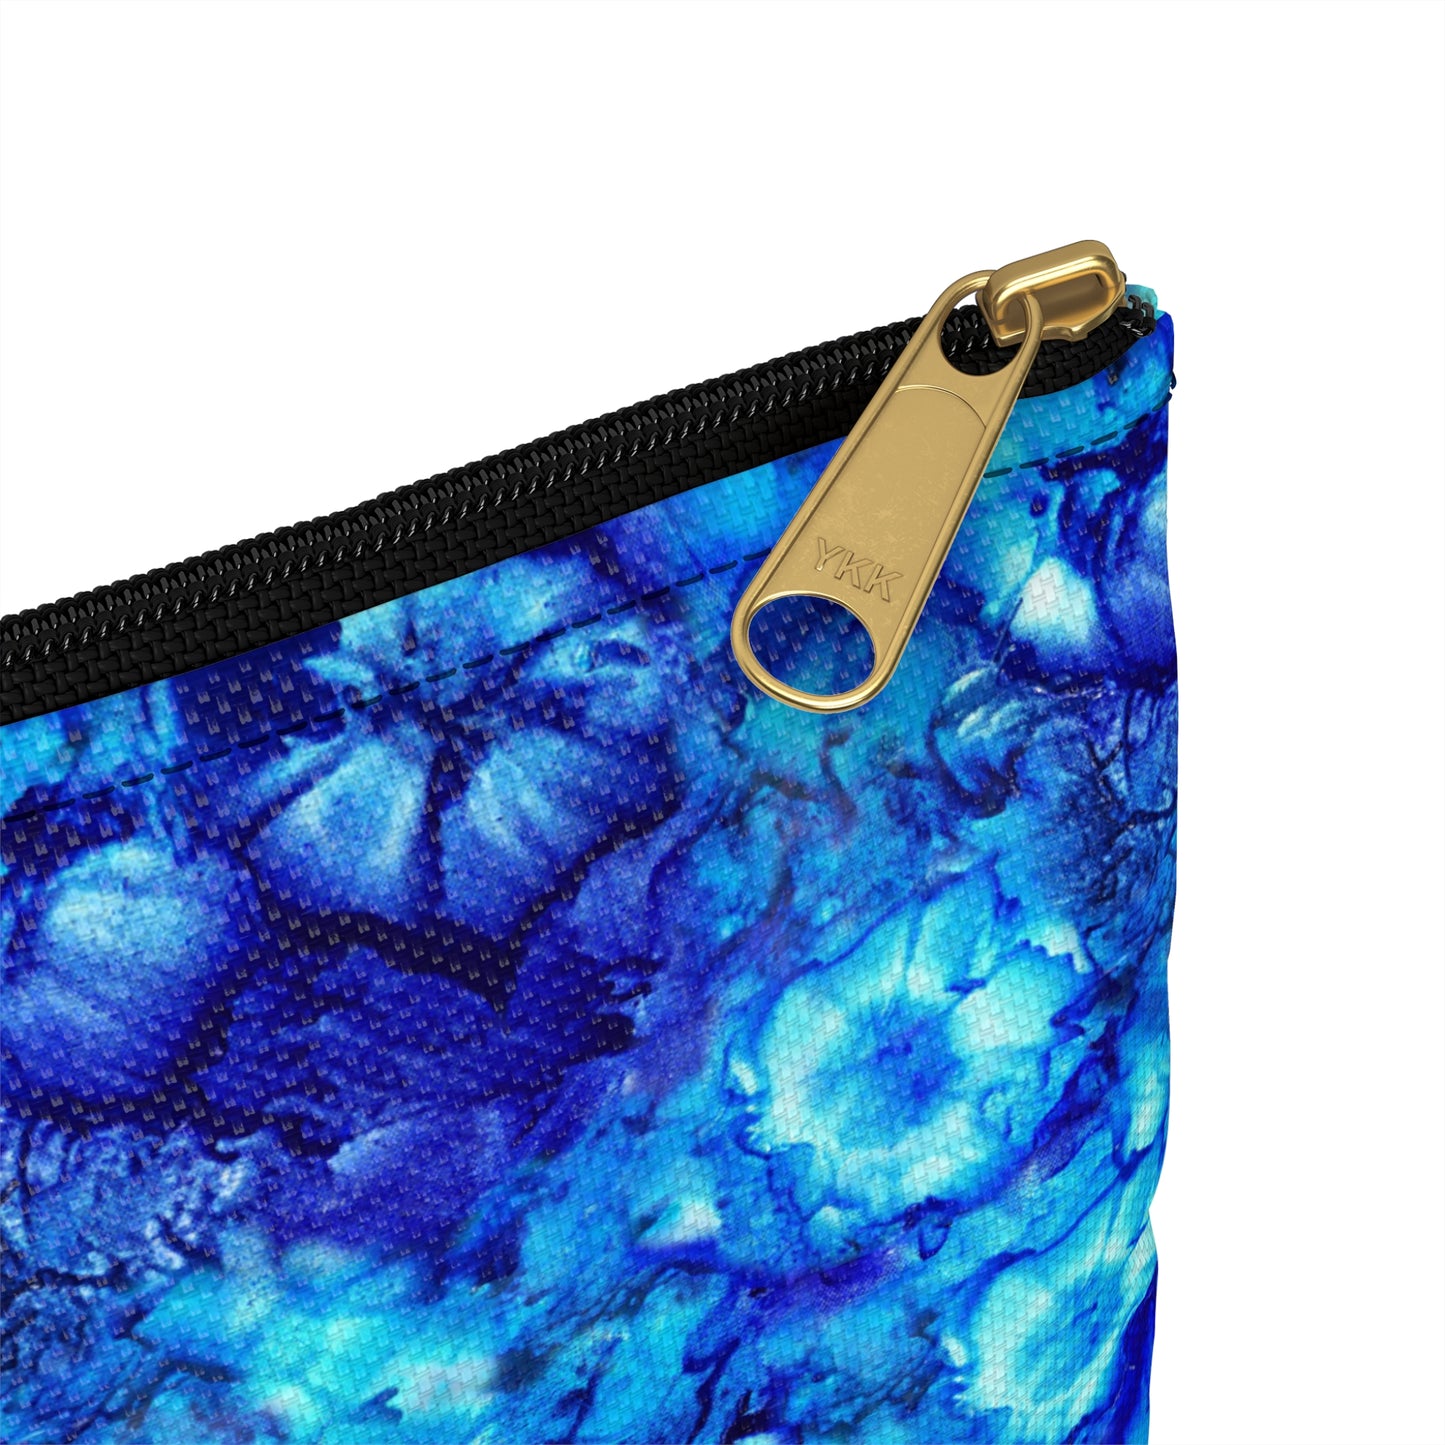 Accessory Pouch - Serenity